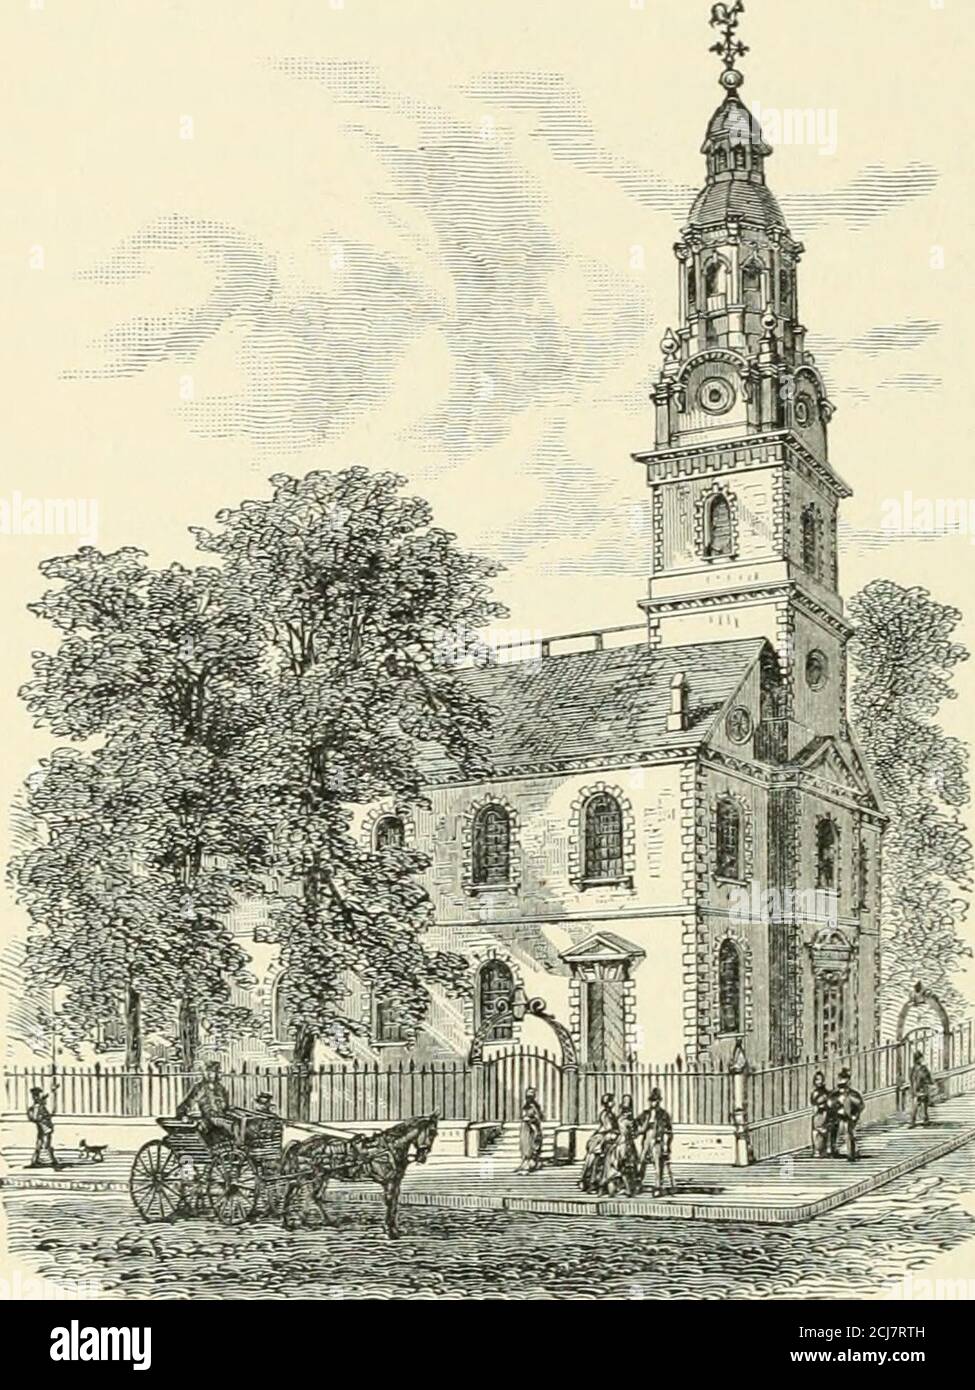 . History of the city of New York: its origin, rise and progress . 69, and was the rival in architecturalpretensions of St. Pauls Chapel. It was located on Fulton (Fair) Street,tlieu quite out of town.^ The Eev. Dr. John Henry Livingston was called to the pulpit the next year.He was young, scarcelytwenty-six years of age, ofsingular personal beauty,tall, athletic, and a pro-ficient in manly exercises.He had been graduatedfrom Yale at sixteen, aftera rigorous examinationnot only in the classics,but astronomy, mathe-matics, and jurisprudence;and he had traveled overEurope, studied theologyin Utr Stock Photo